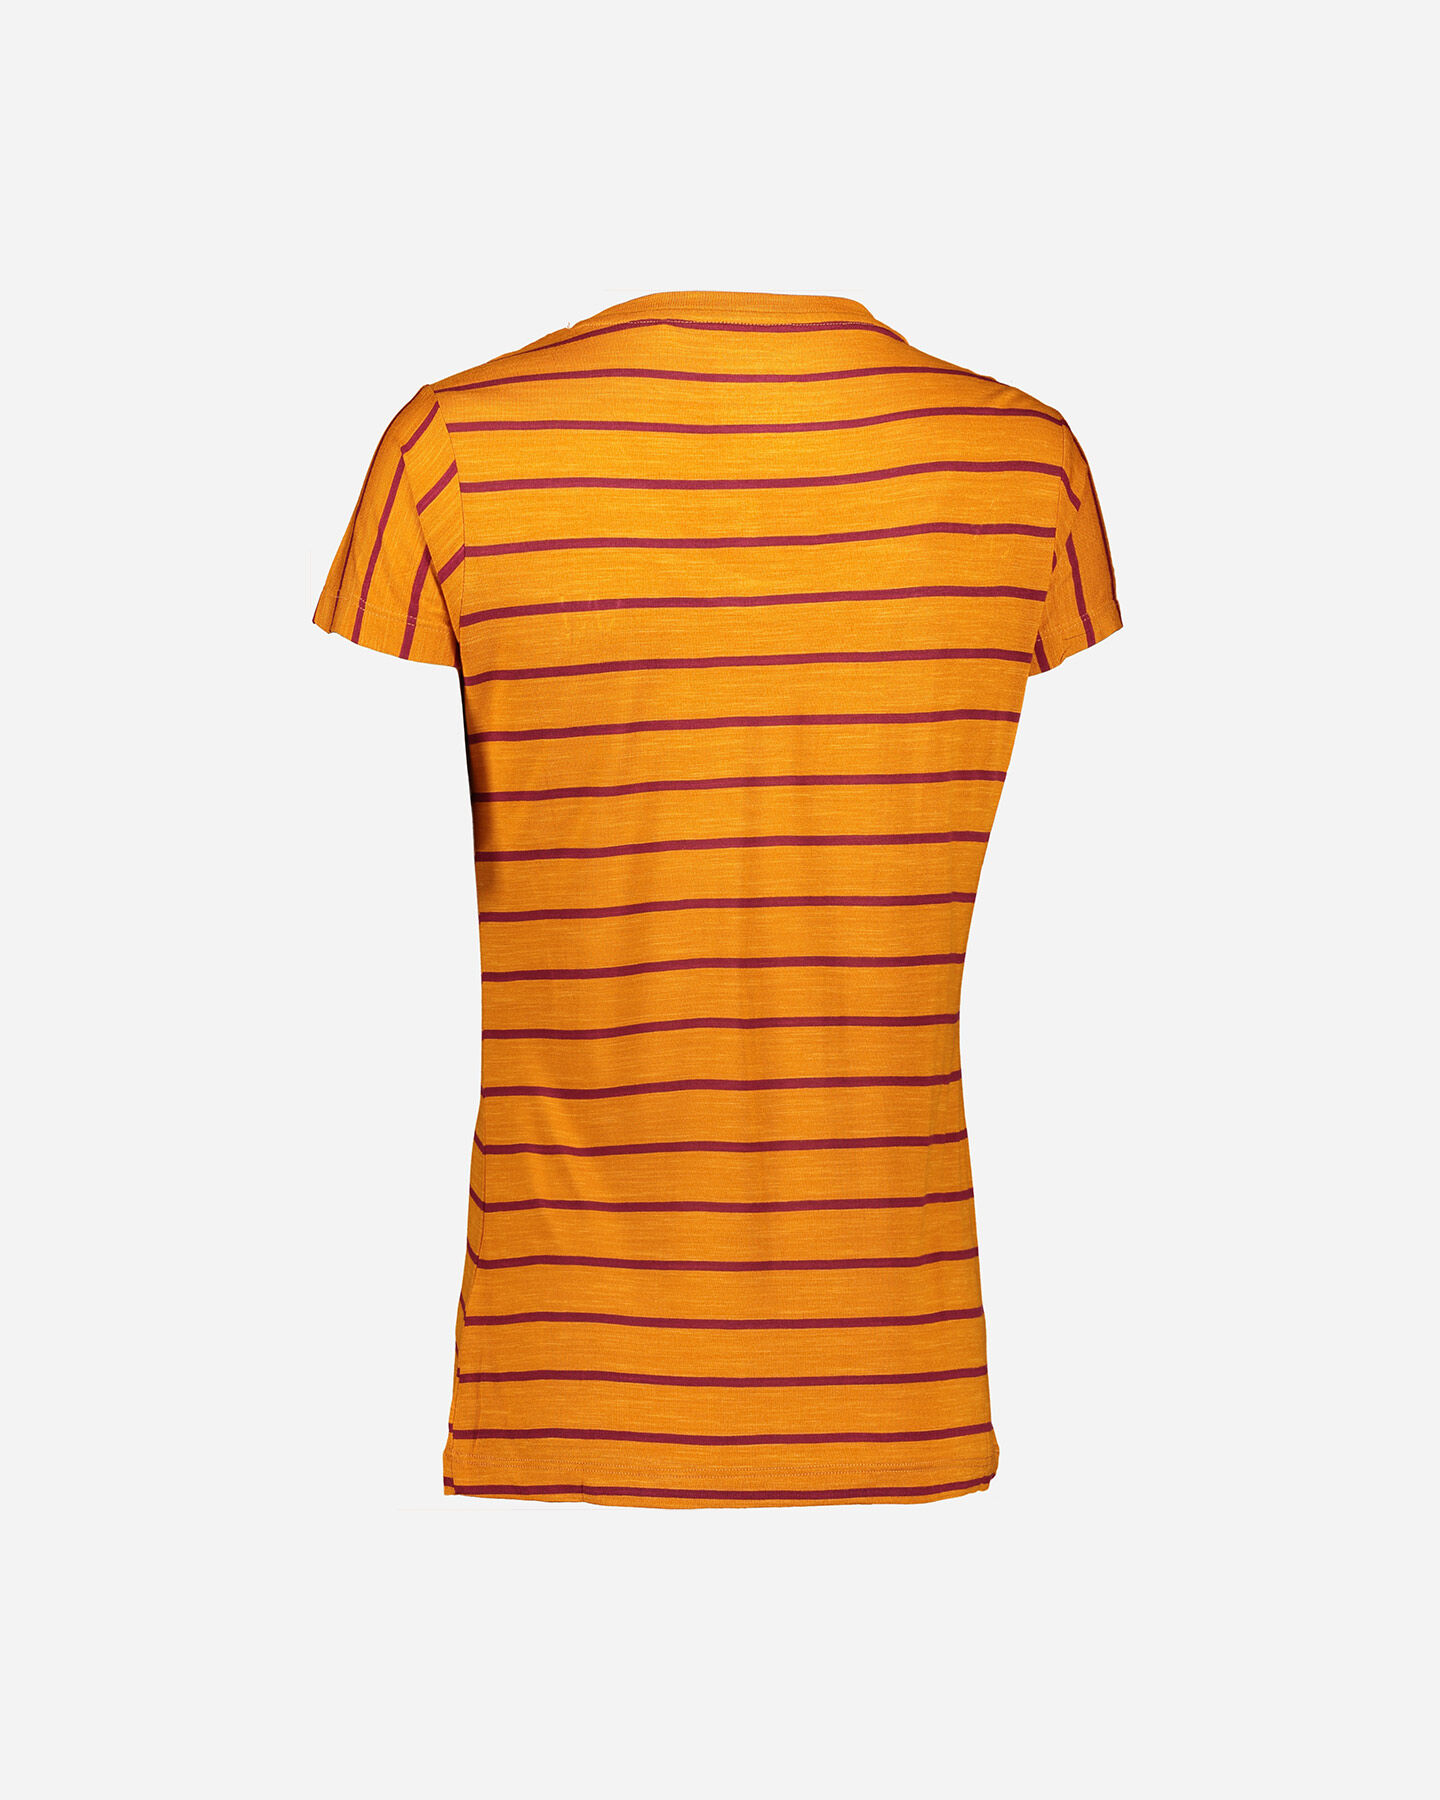  T-Shirt MISTRAL STRIPES W S4087791 scatto 1